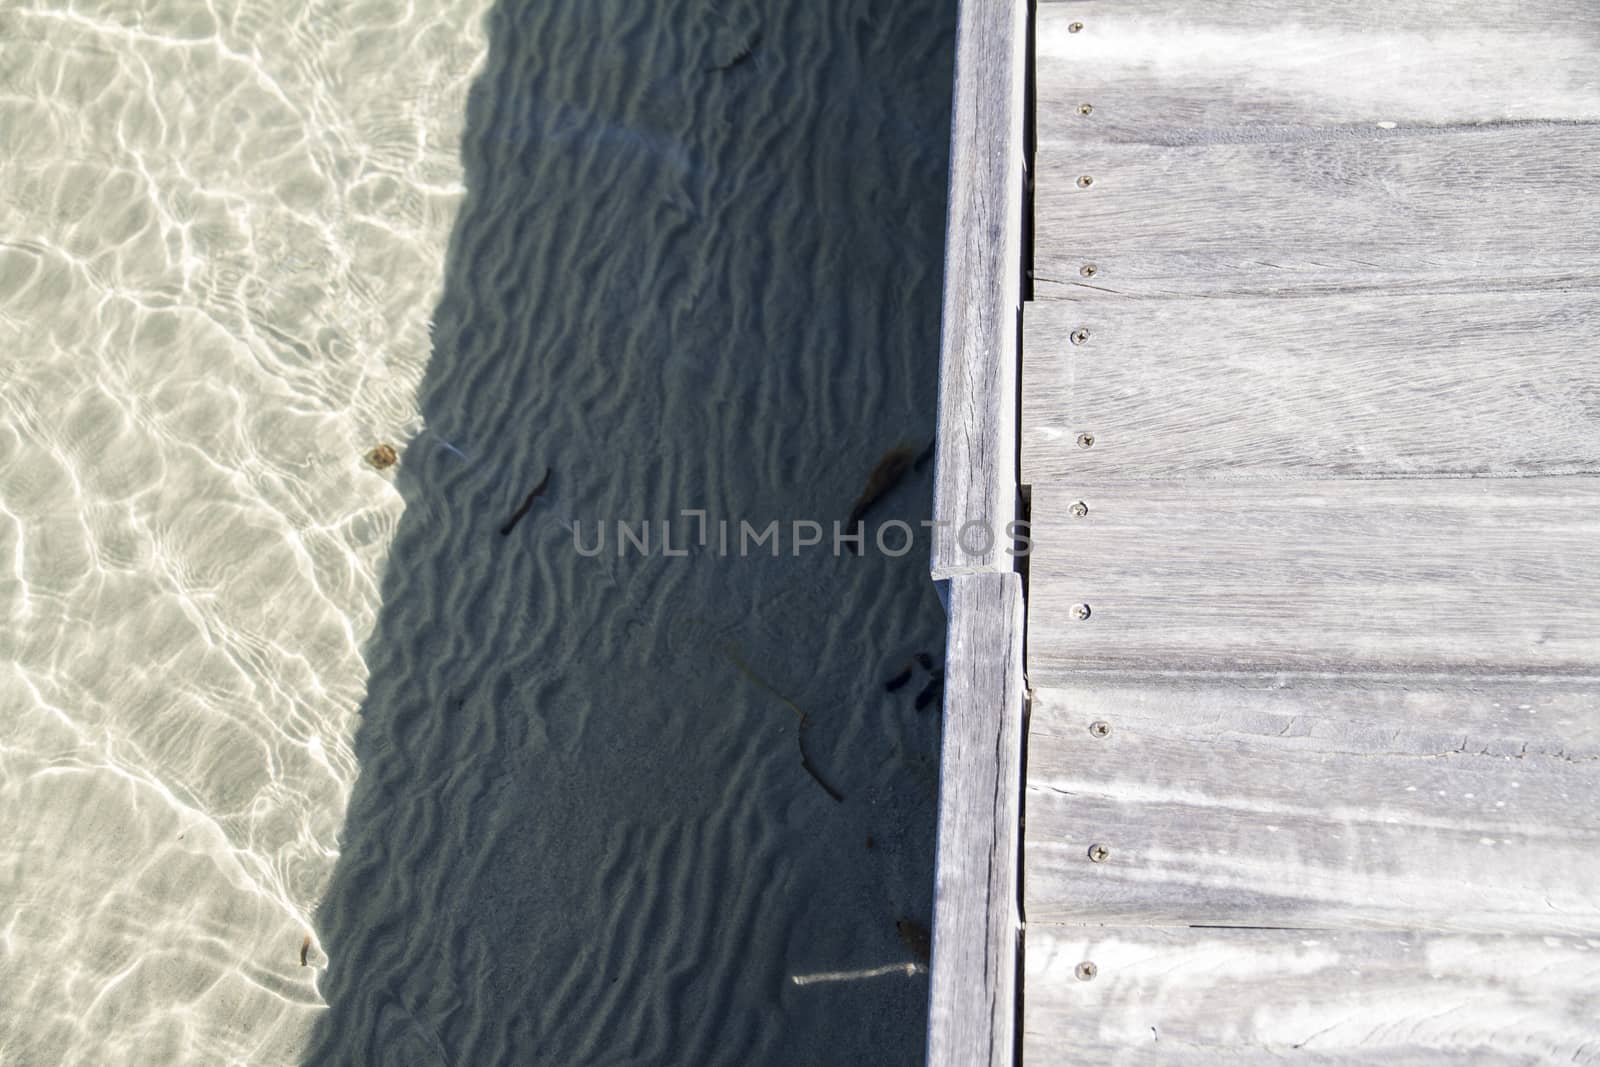 Wooden boardwalk on transparent sea water with sand on bottom by robbyfontanesi